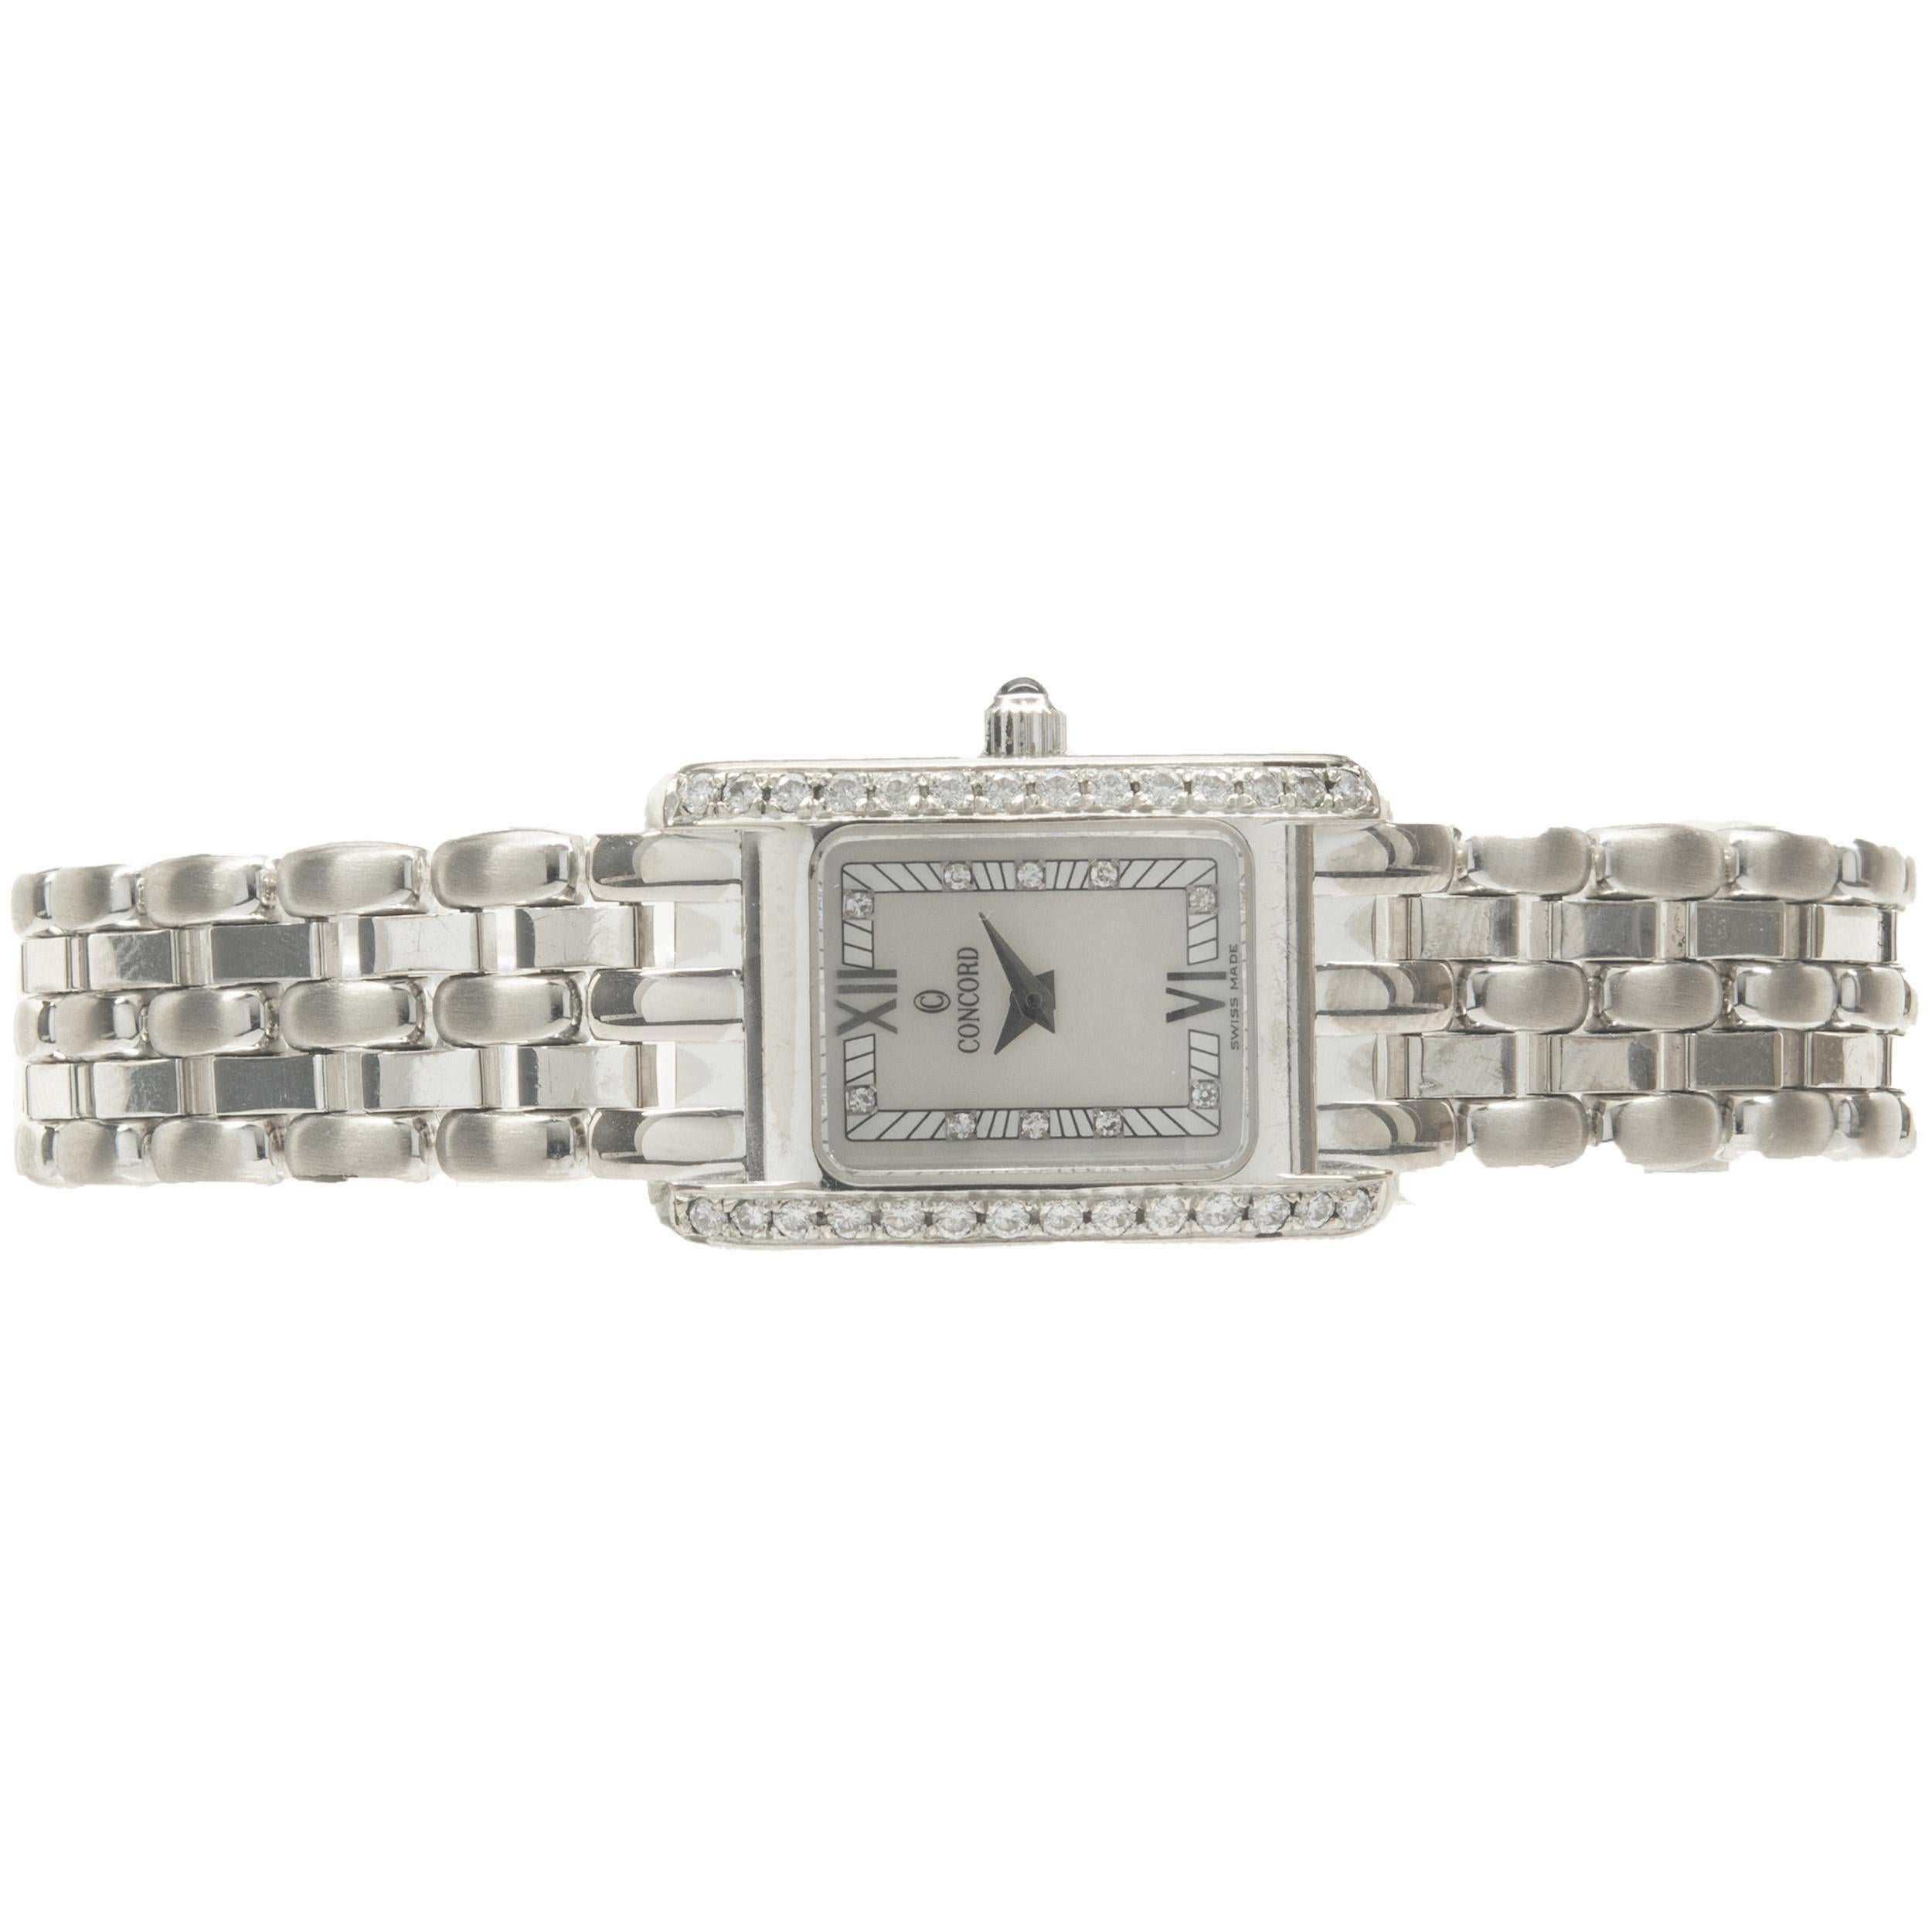 Movement: quartz
Function: hours, minutes
Case: 24mm rectangular case, diamond bezel, sapphire crystal, pull/push crown, water resistant
Dial: mother of pearl diamond dial
Band: Concord 18K white gold panther link bracelet, integrated clasp
Serial#: